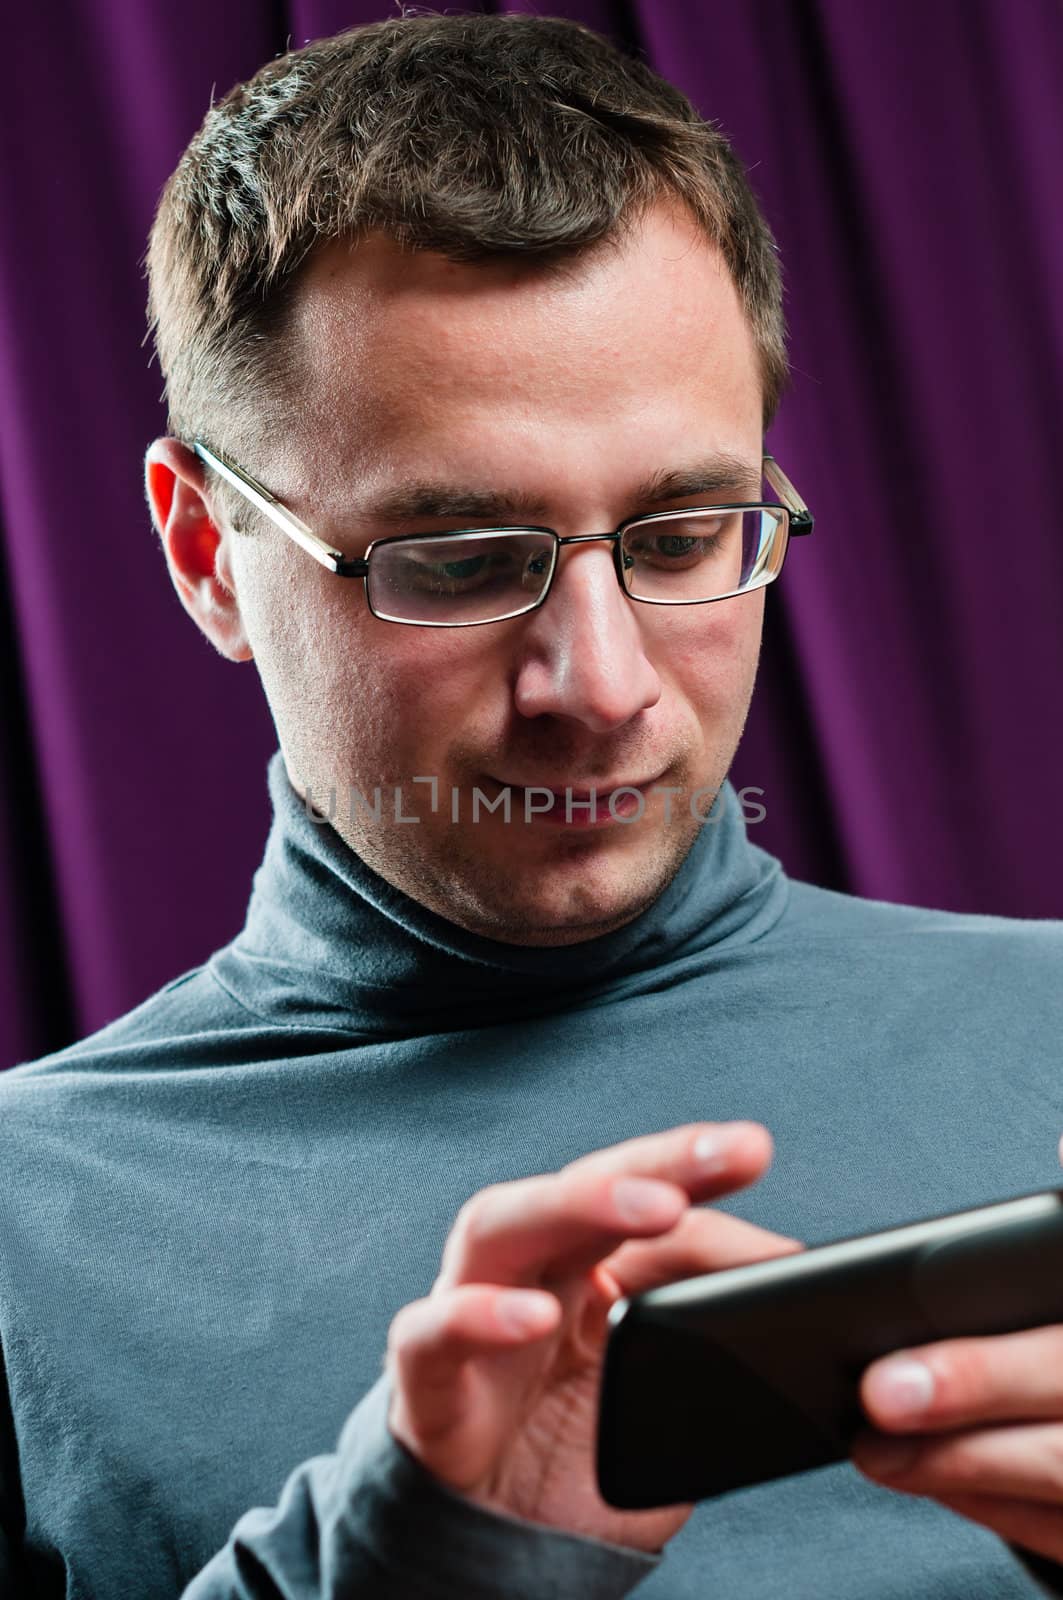 Man portrait with cellphone in arms with purple curtain on background